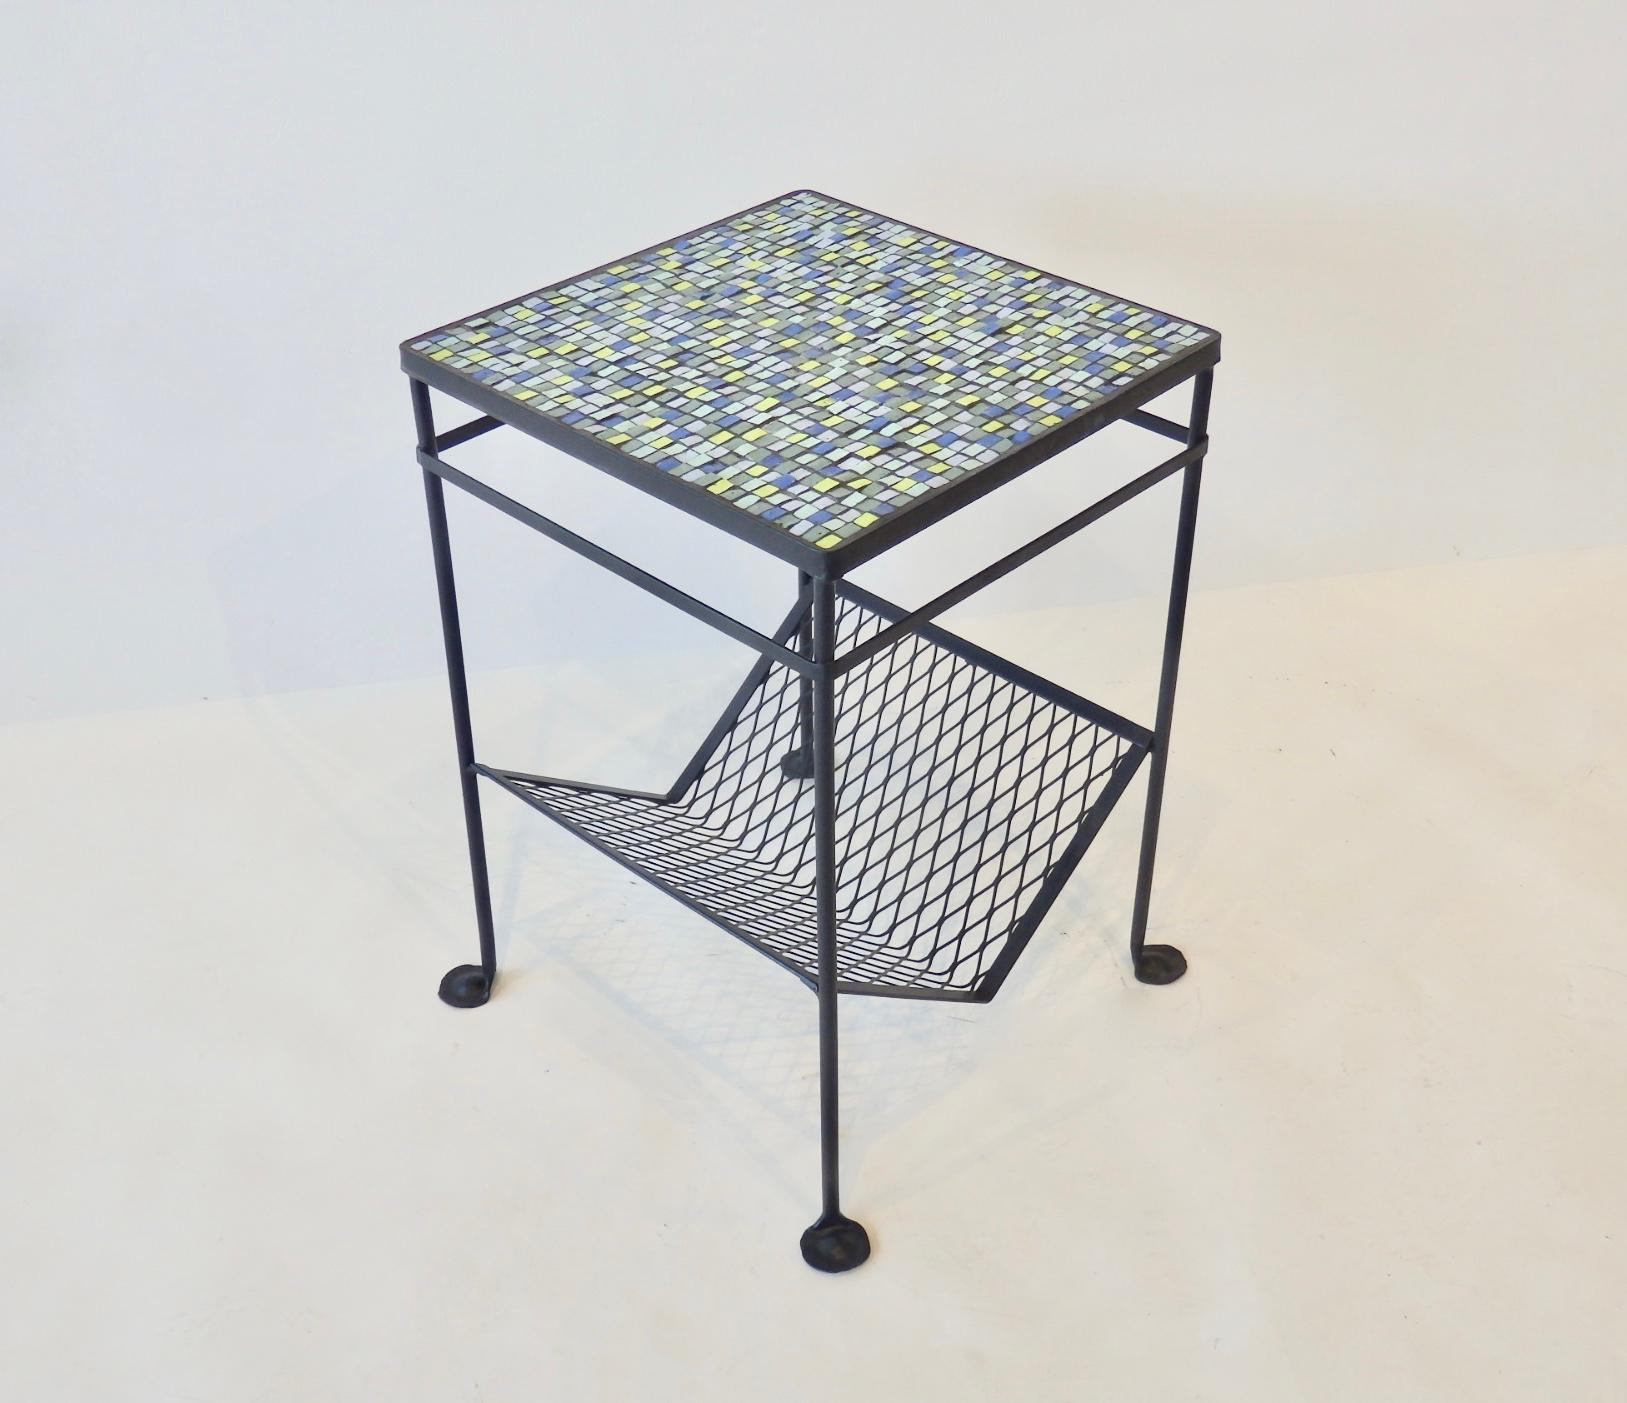 A one of a kind handcrafted mosaic top table made with thick Italian tile on a restored vintage wrought iron frame with magazine rack.   
Suitable for indoor or outdoor use.
The footed legs able you to secure the table in the garden as a option.
